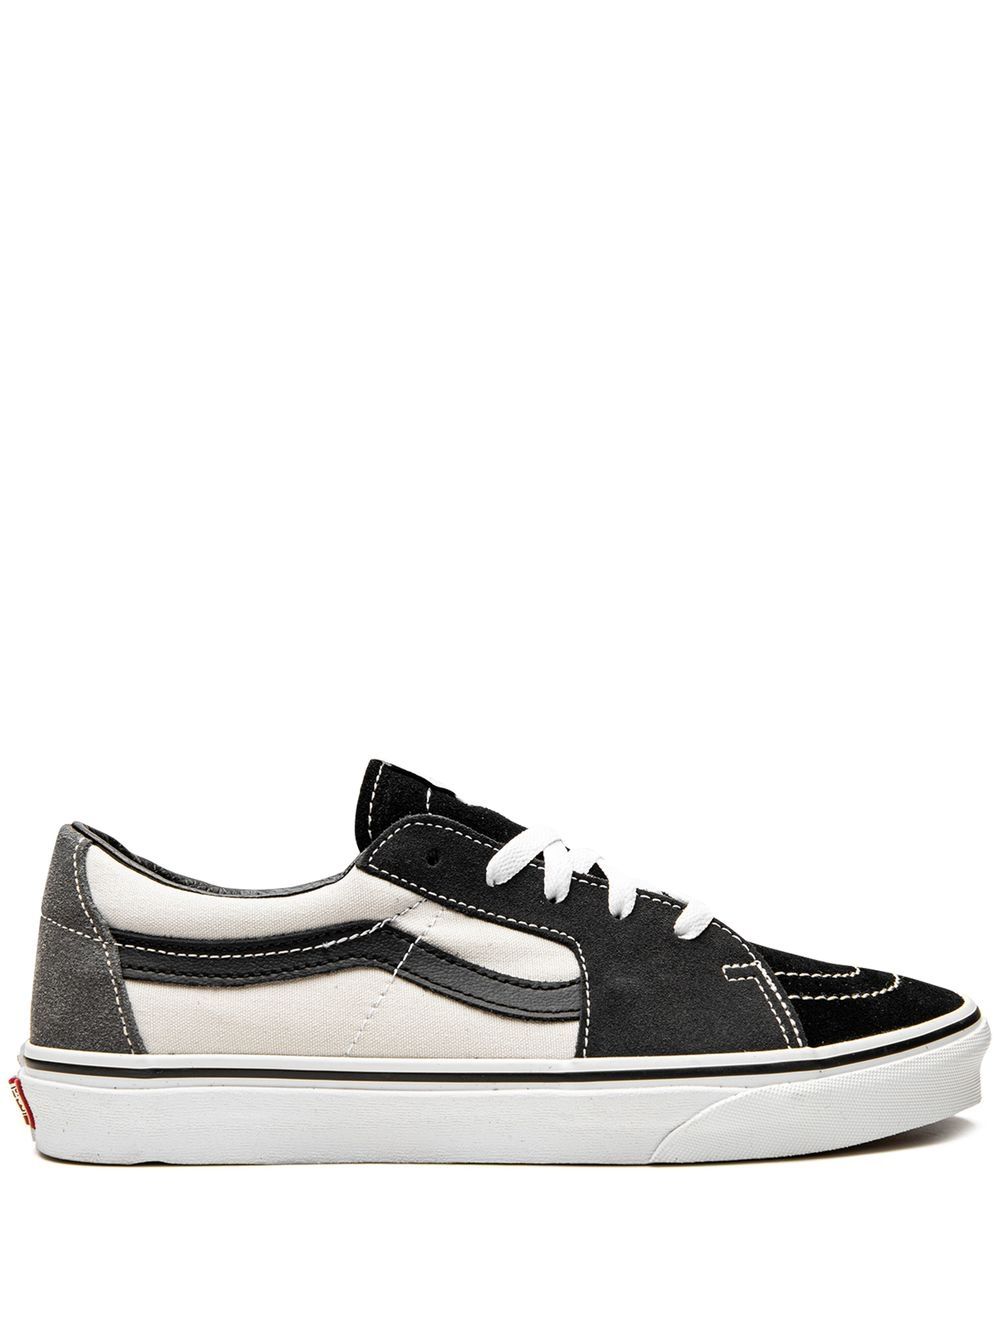 Vans Sk8-low Sneakers In Color Block White And Gray In Drizzle/white